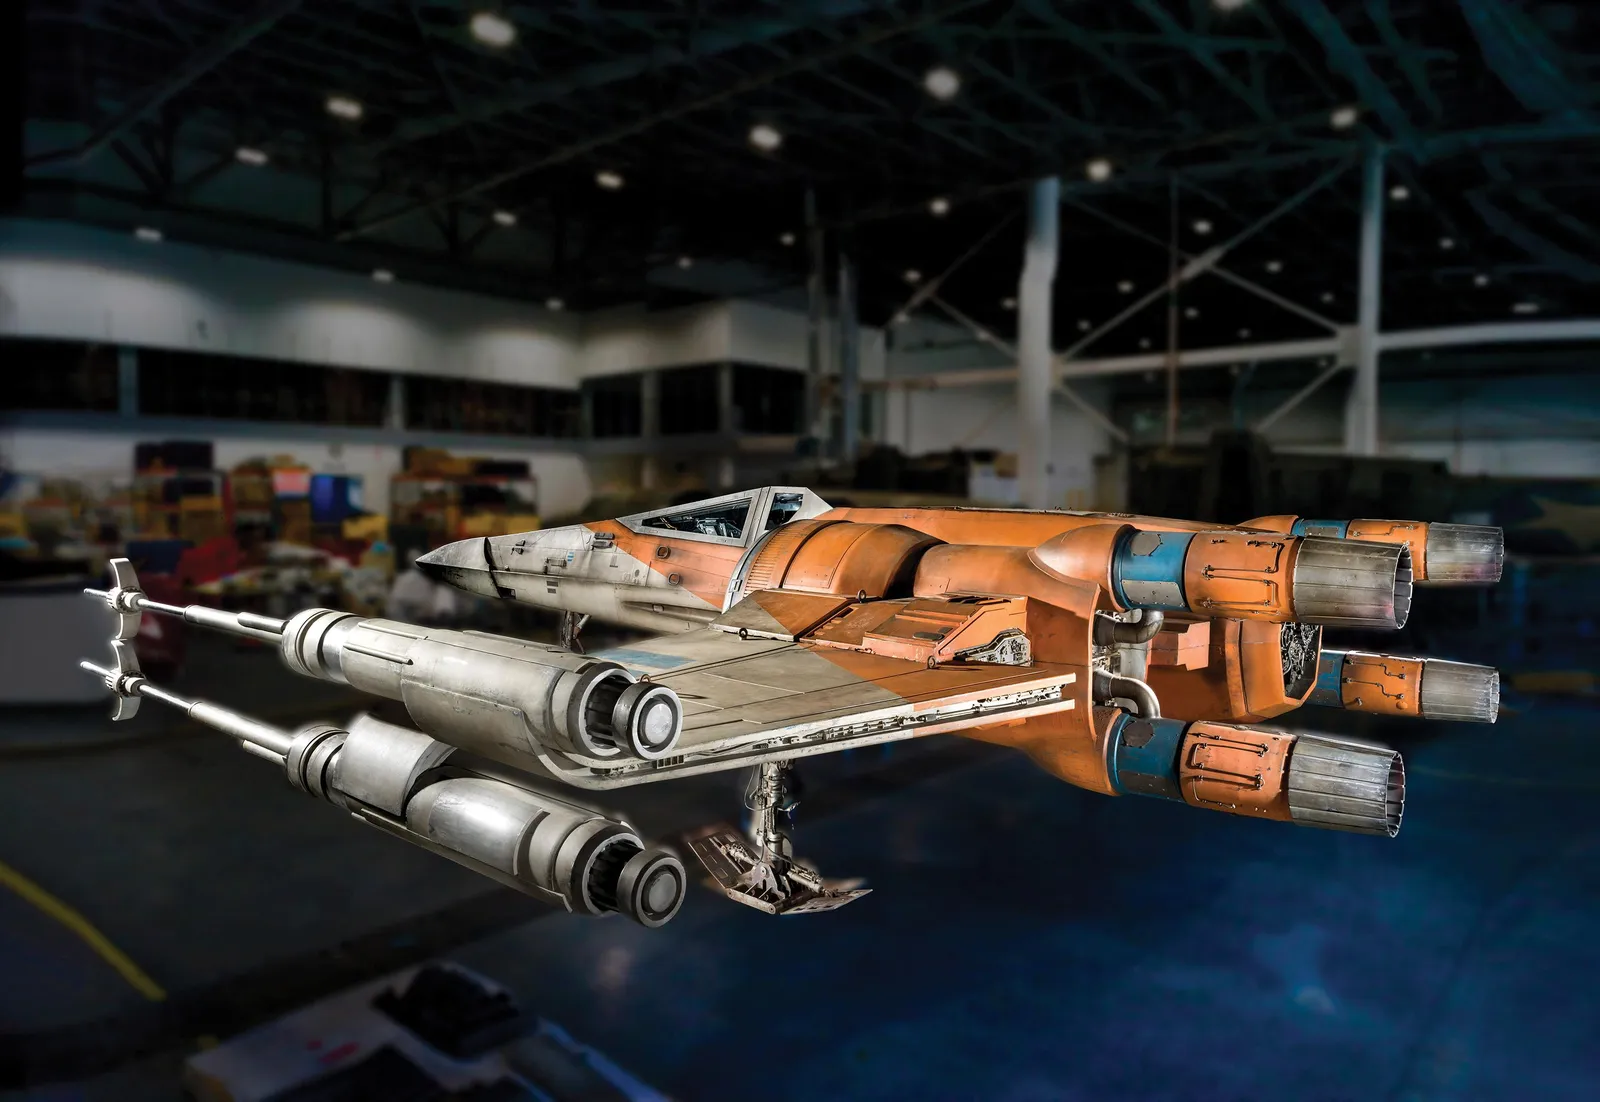 Star Wars X-wing: From Screen-Used Prop to Museum Artifact